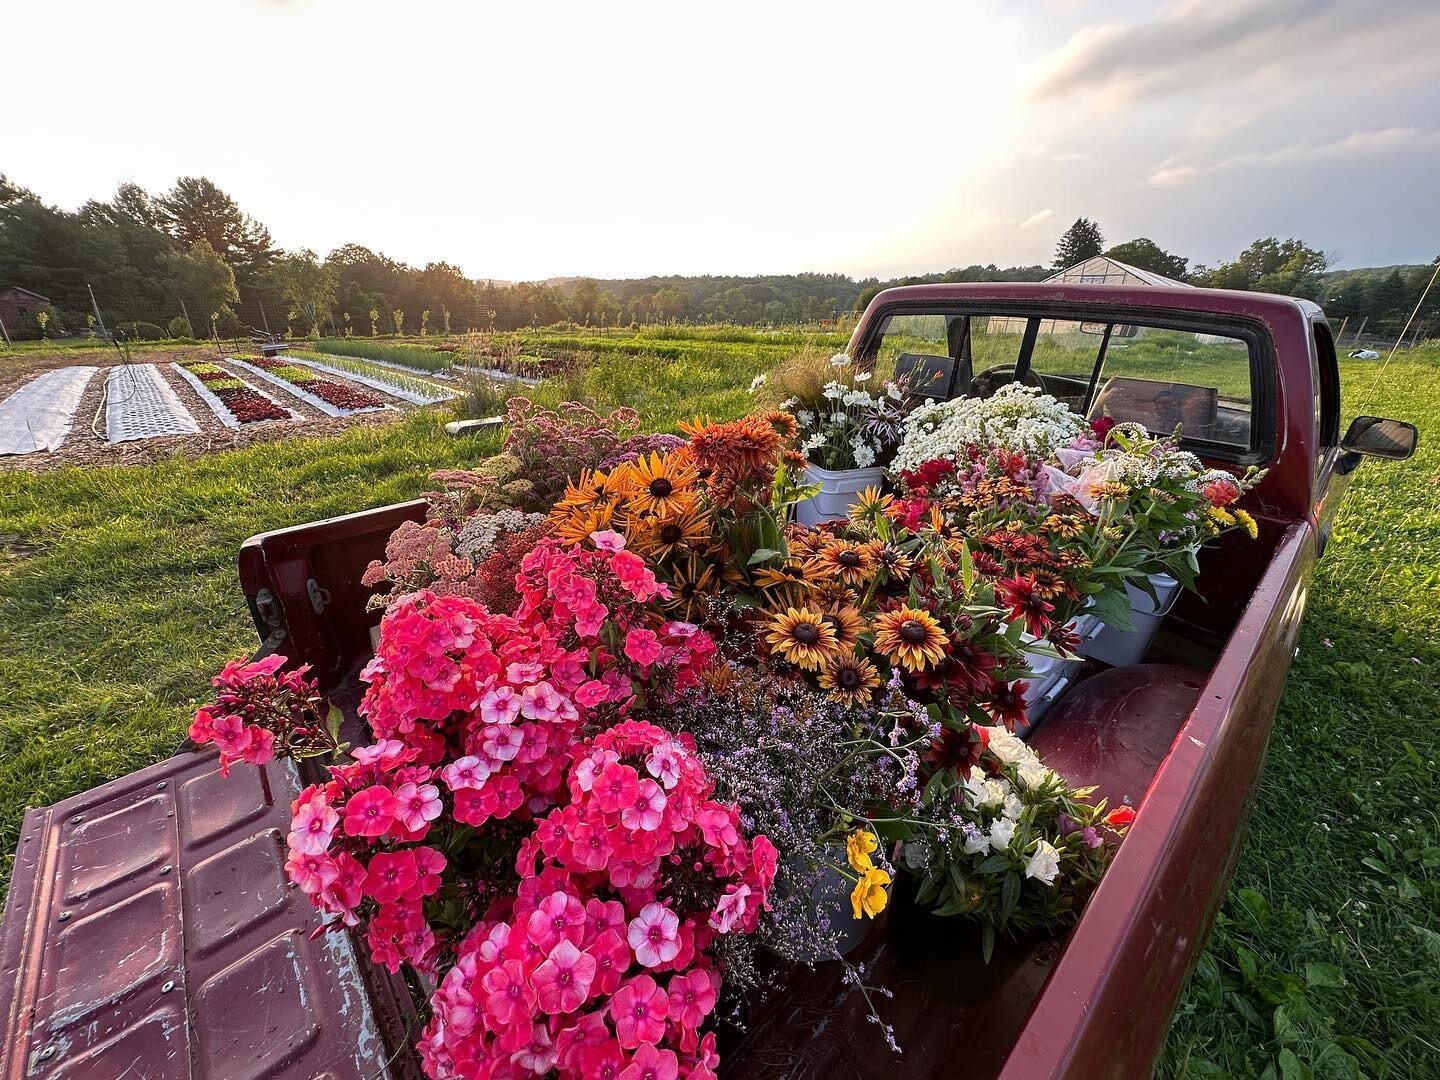 Evening harvest before the rain &hellip;.. Get these babies tomorrow @litchfieldhillsfarmfreshmarket &hellip;.
We are taking requests for pop ups! DM us here or email rachel@helmsteadfarm.com
See you Saturday #grownnotflown #localflowers